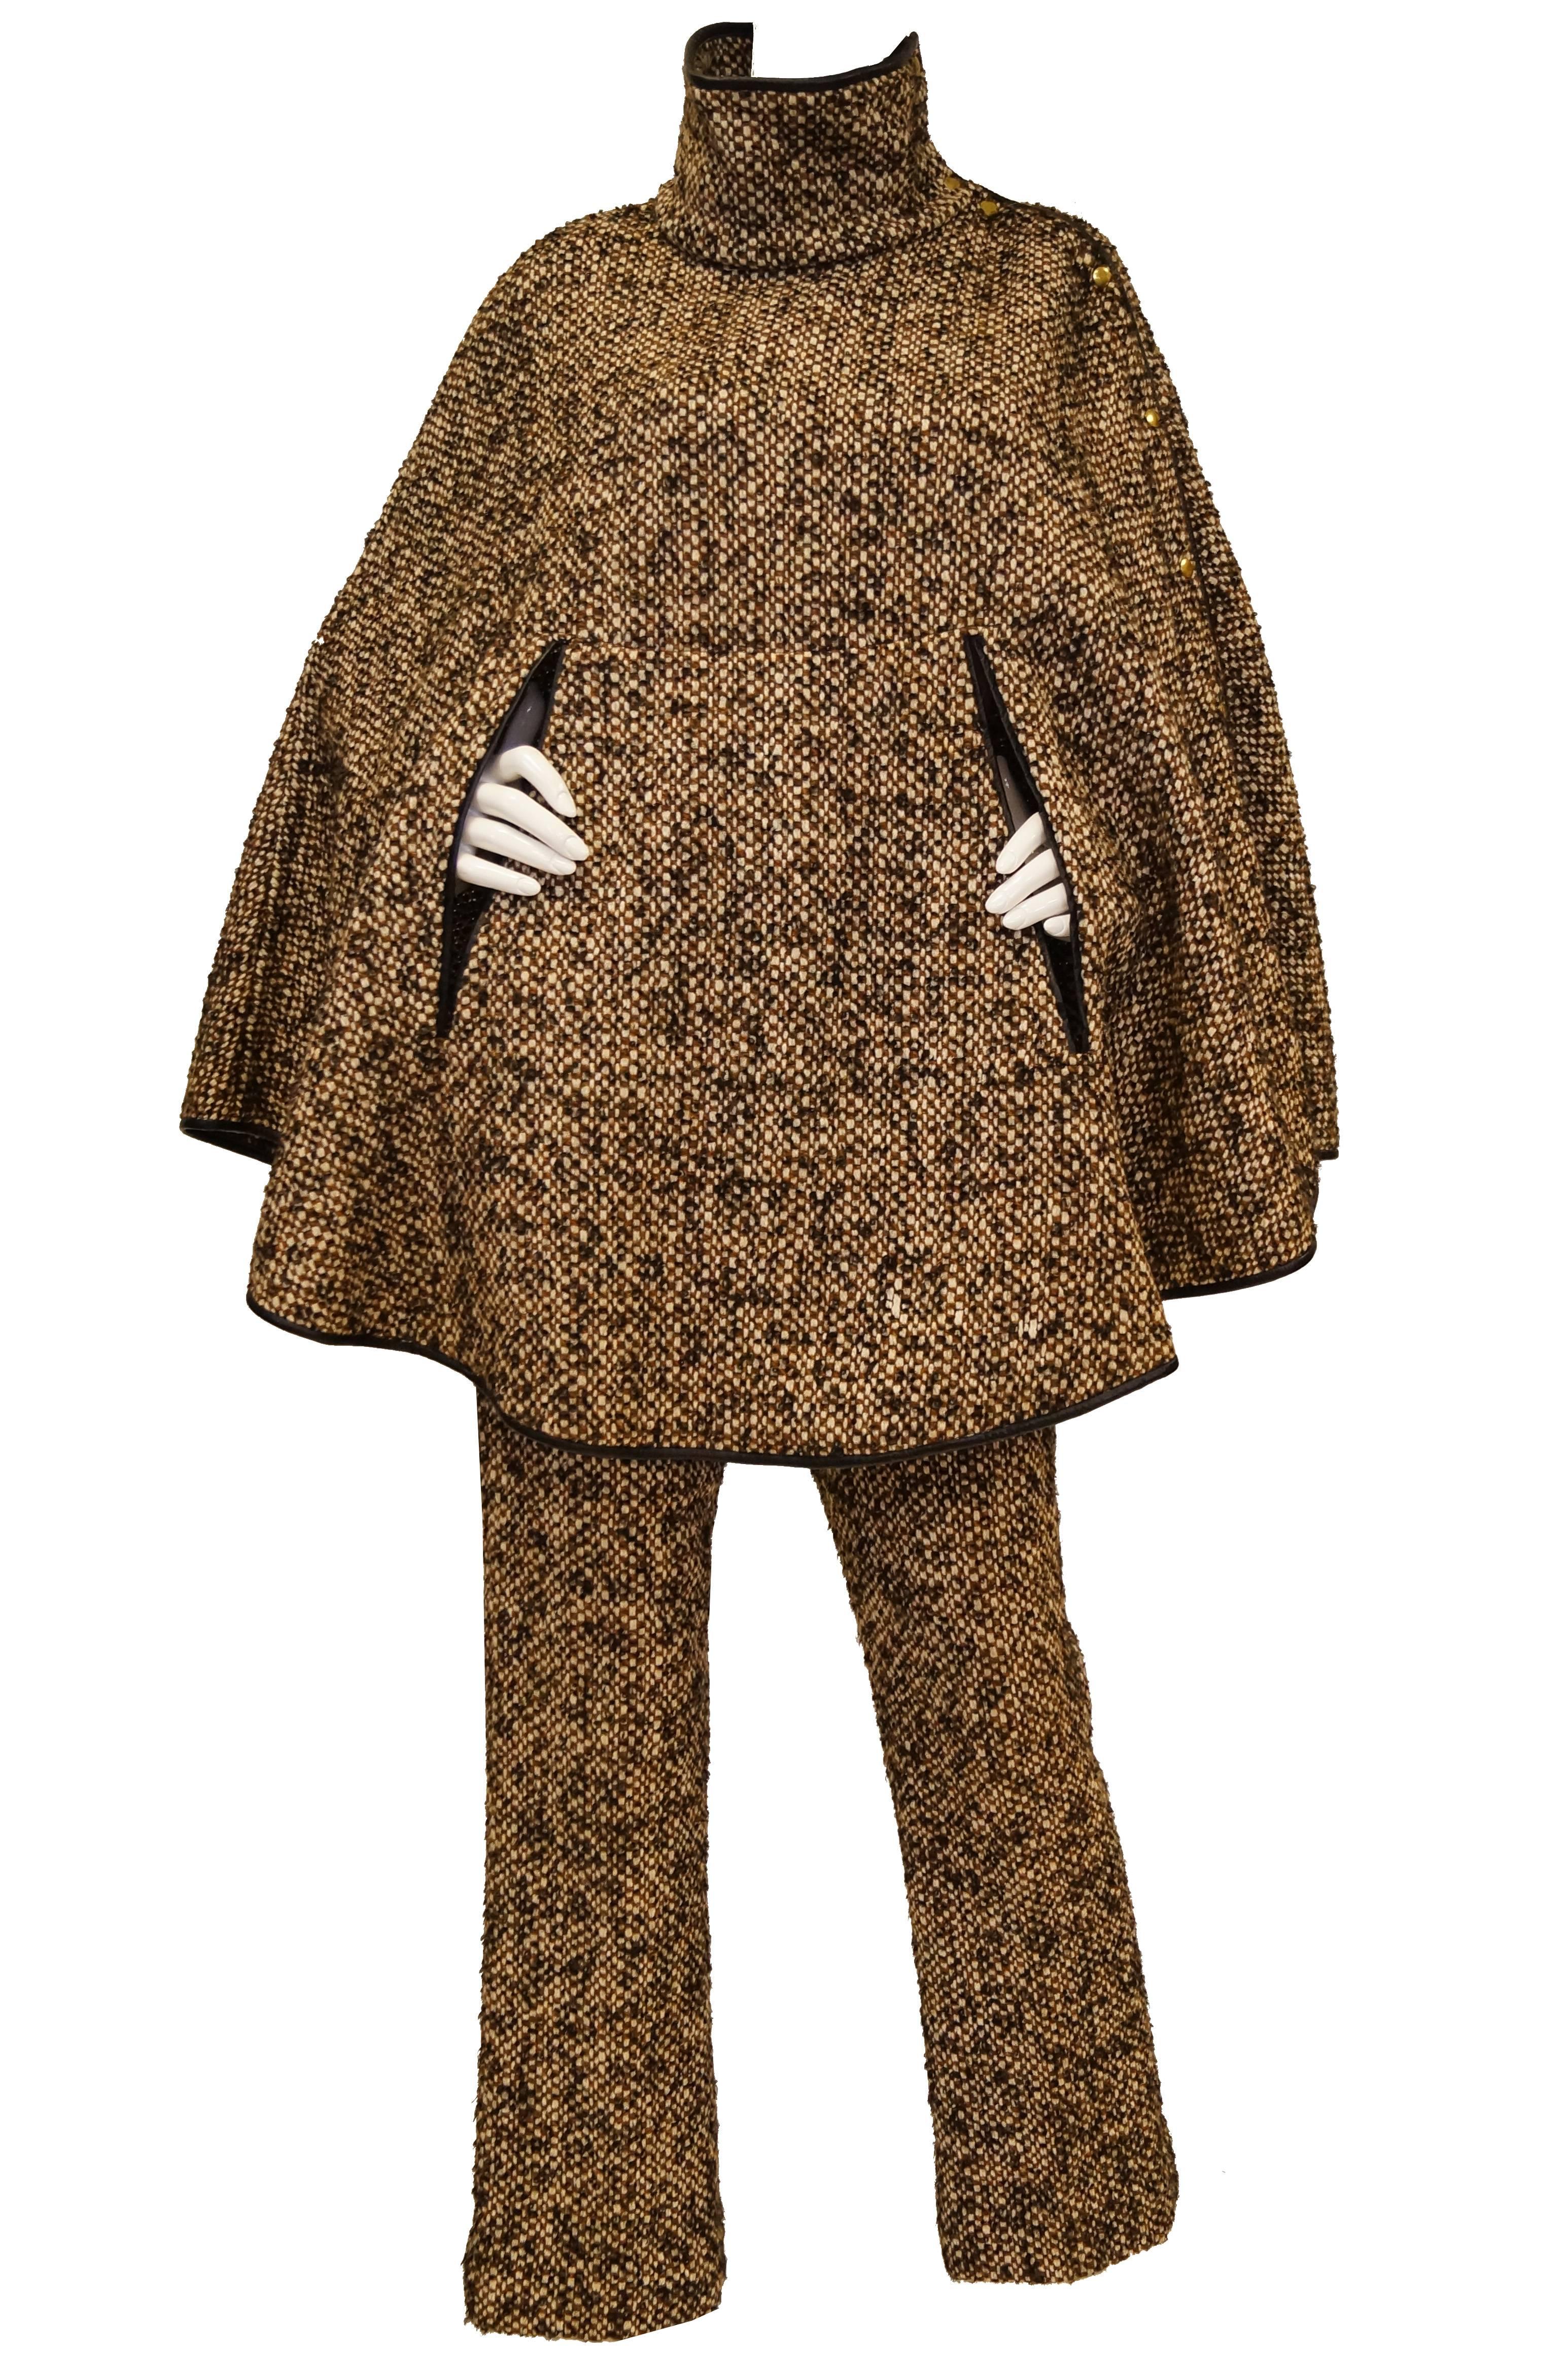 
Fantastic coordinating cape and trowser set by Bonnie Cashin for Sills and Company! The multi shades of brown cape, while often a dramatic and flamboyant garment, is made austere yet undeniably chic via the exaggeratedly large, relaxed barleycorn